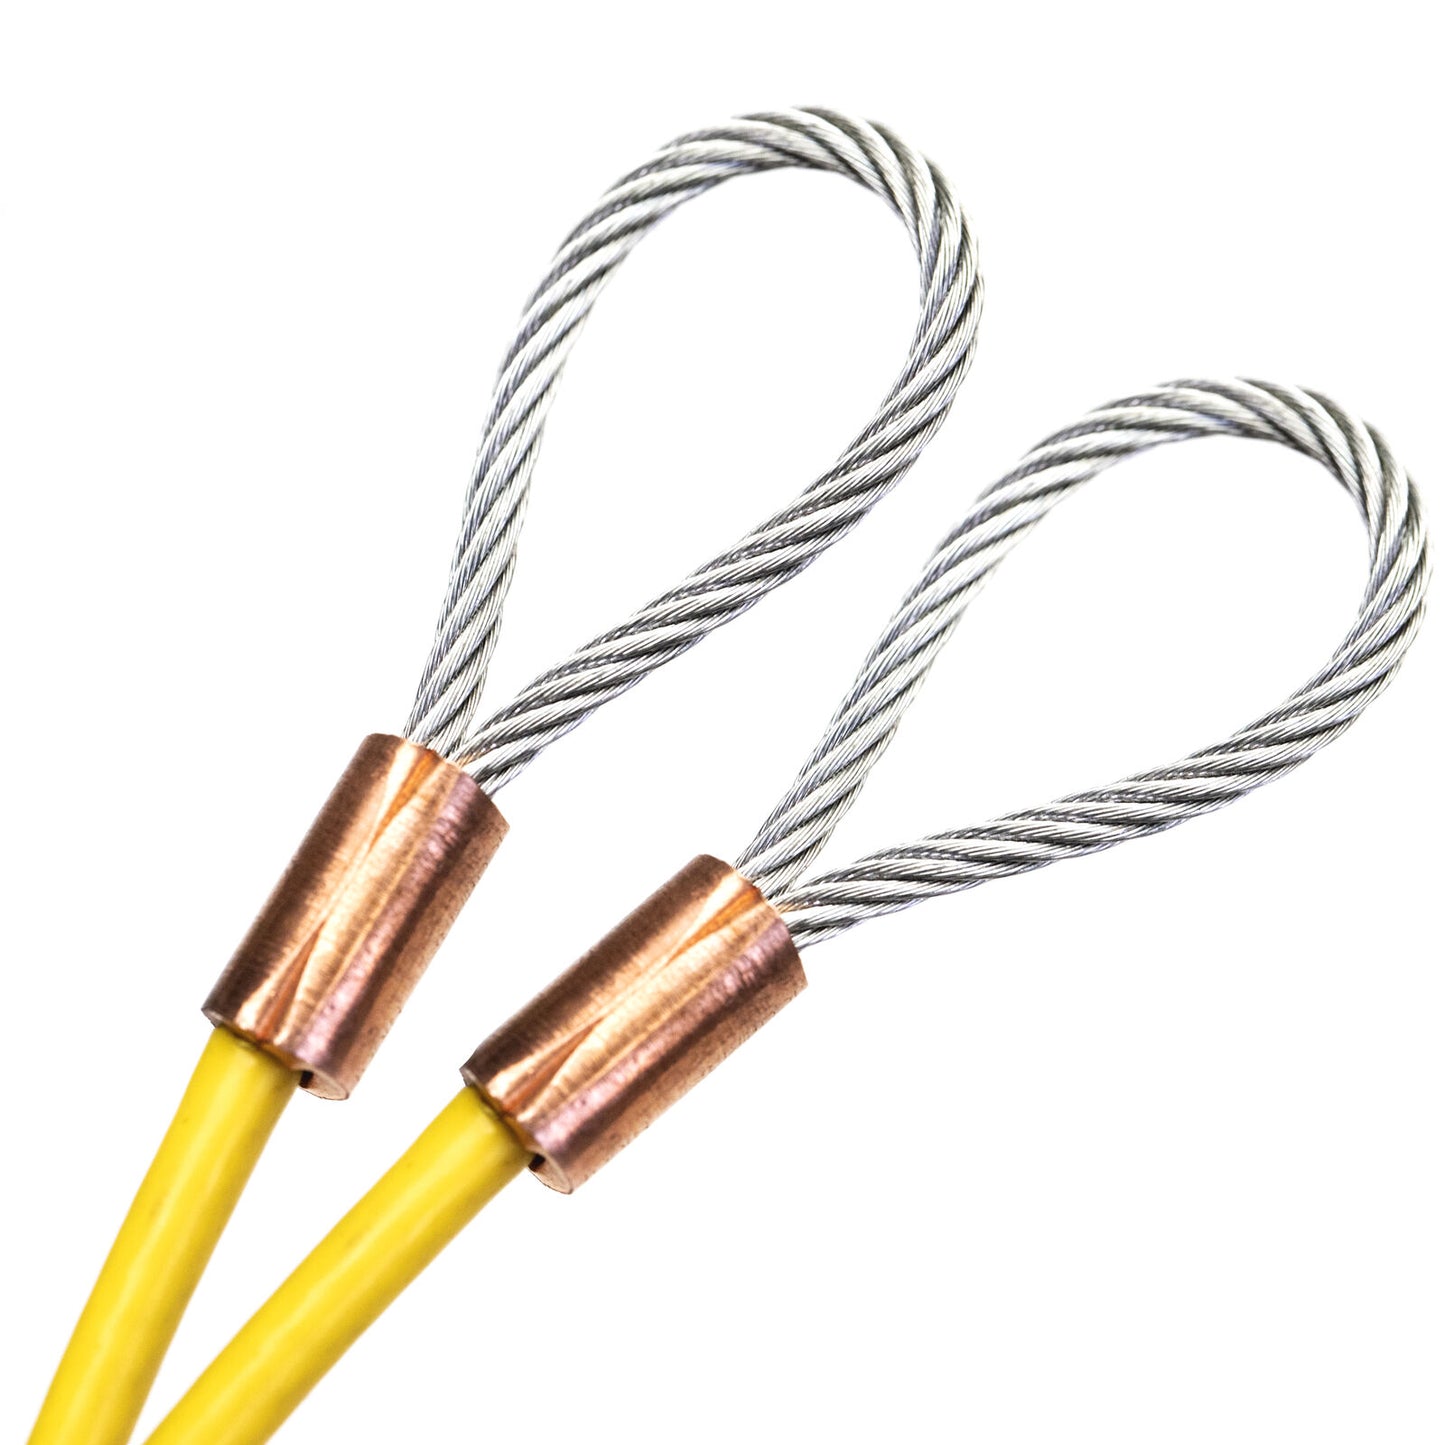 1-100ft Cut To Size 1/8 Galvanized Steel Cable YELLOW Vinyl Coated To 1/16 With Copper Sleeves MADE IN USA